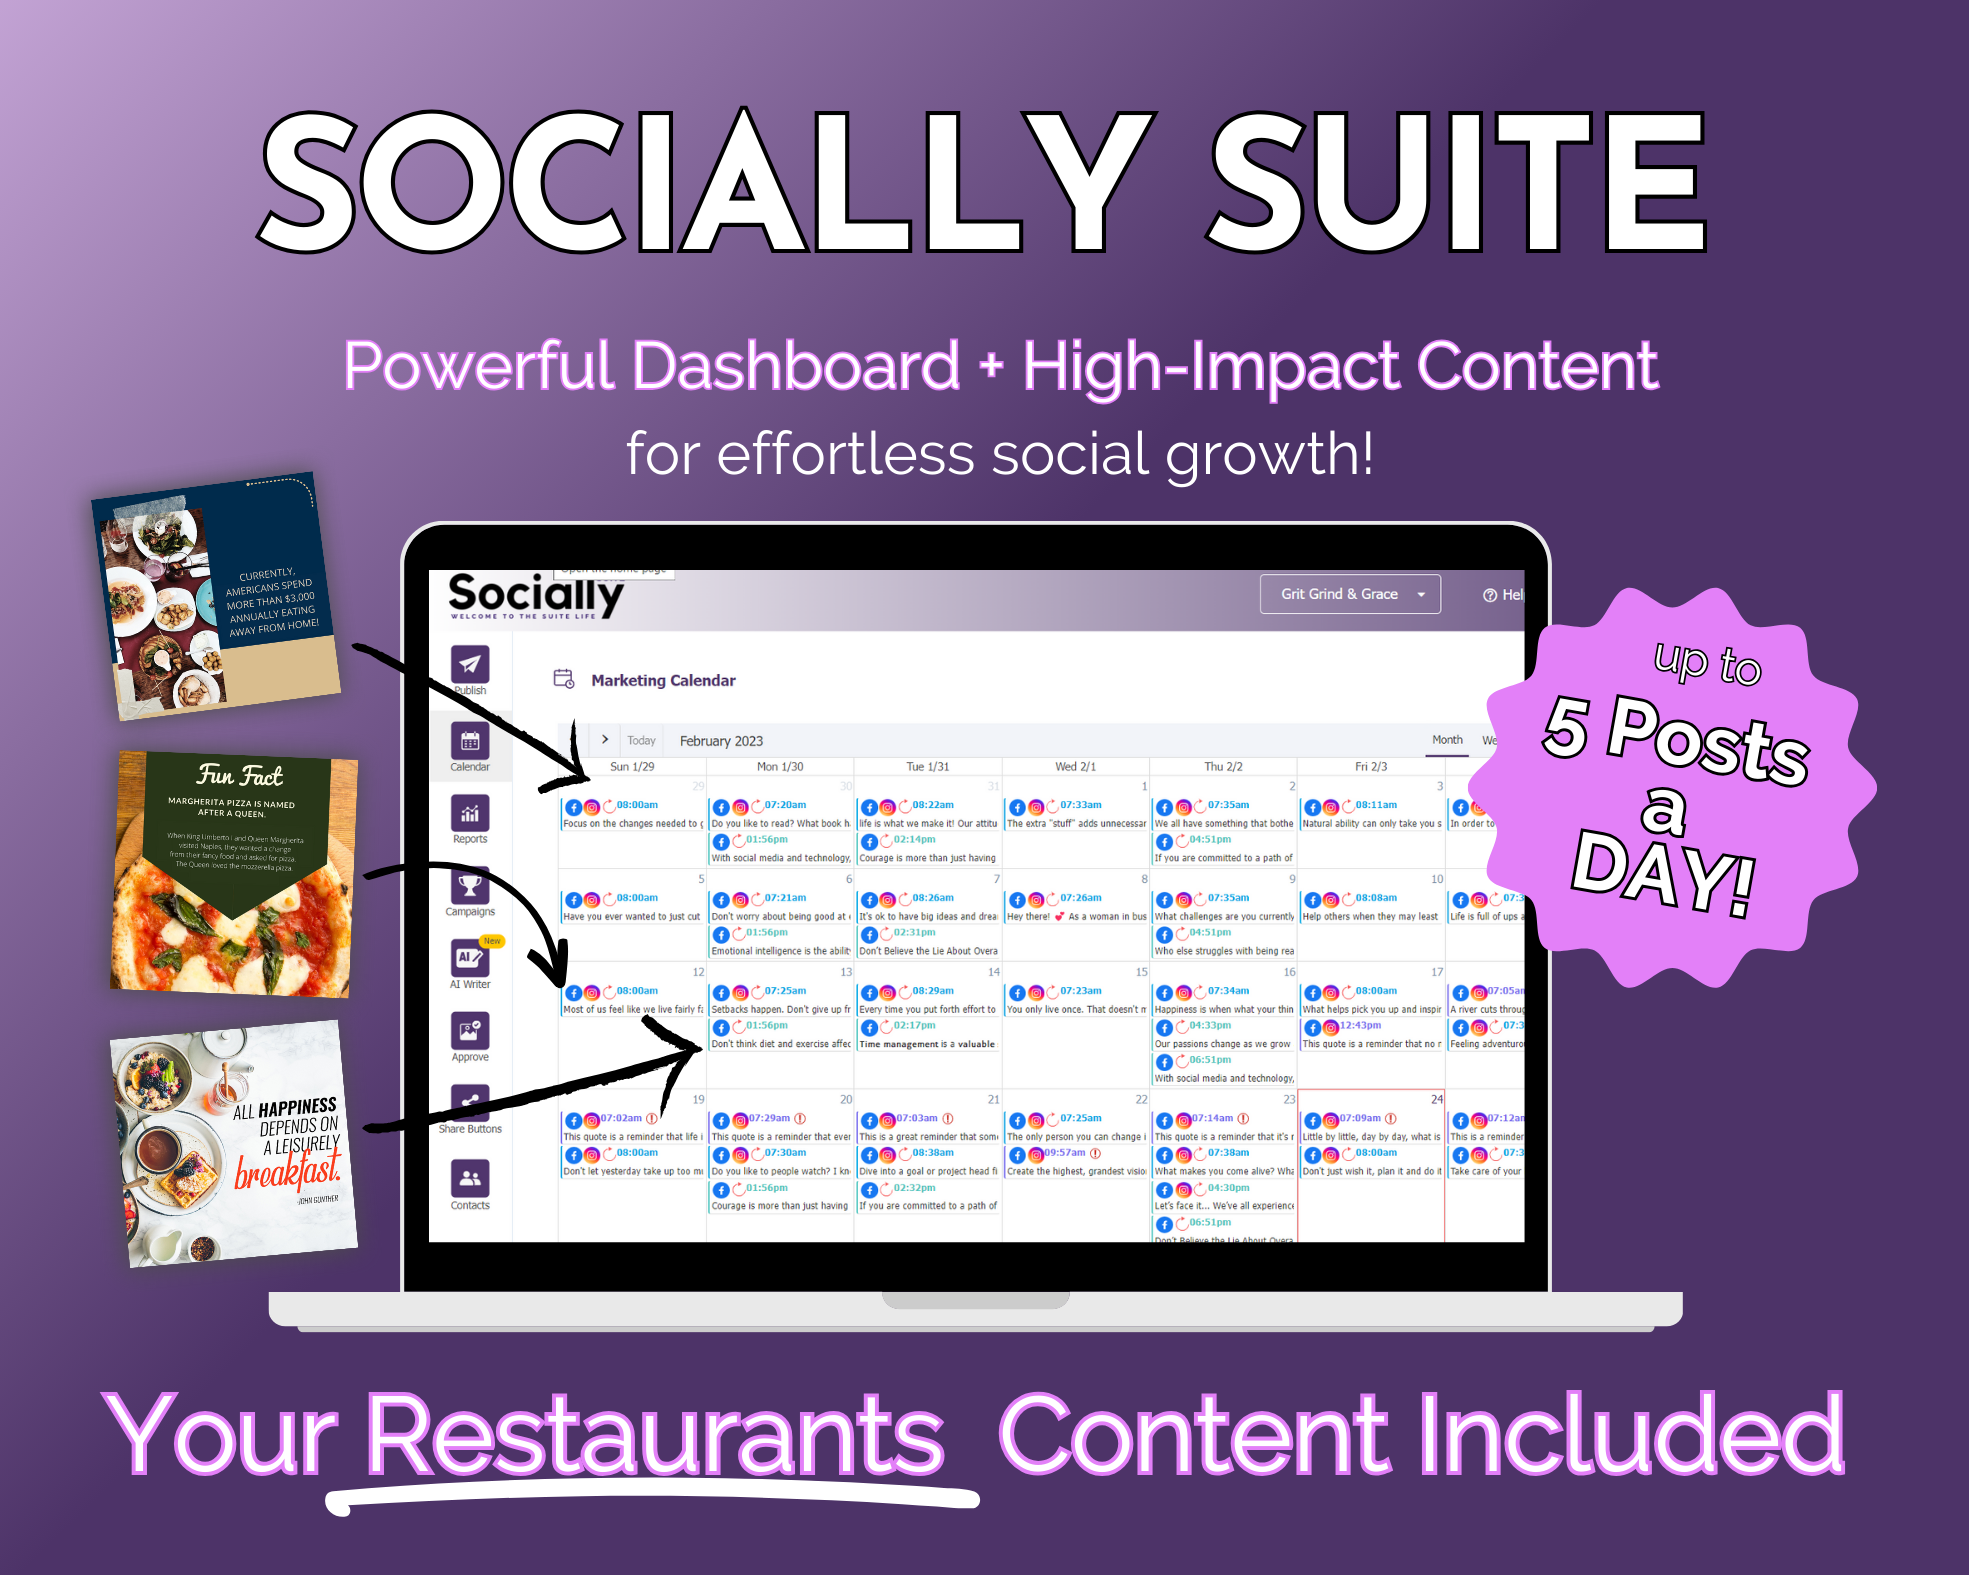 A promotional graphic for 'Socially Suite Membership' by Get Socially Inclined, a social media marketing tool for restaurants, featuring a content dashboard that allows up to 5 posts a day.